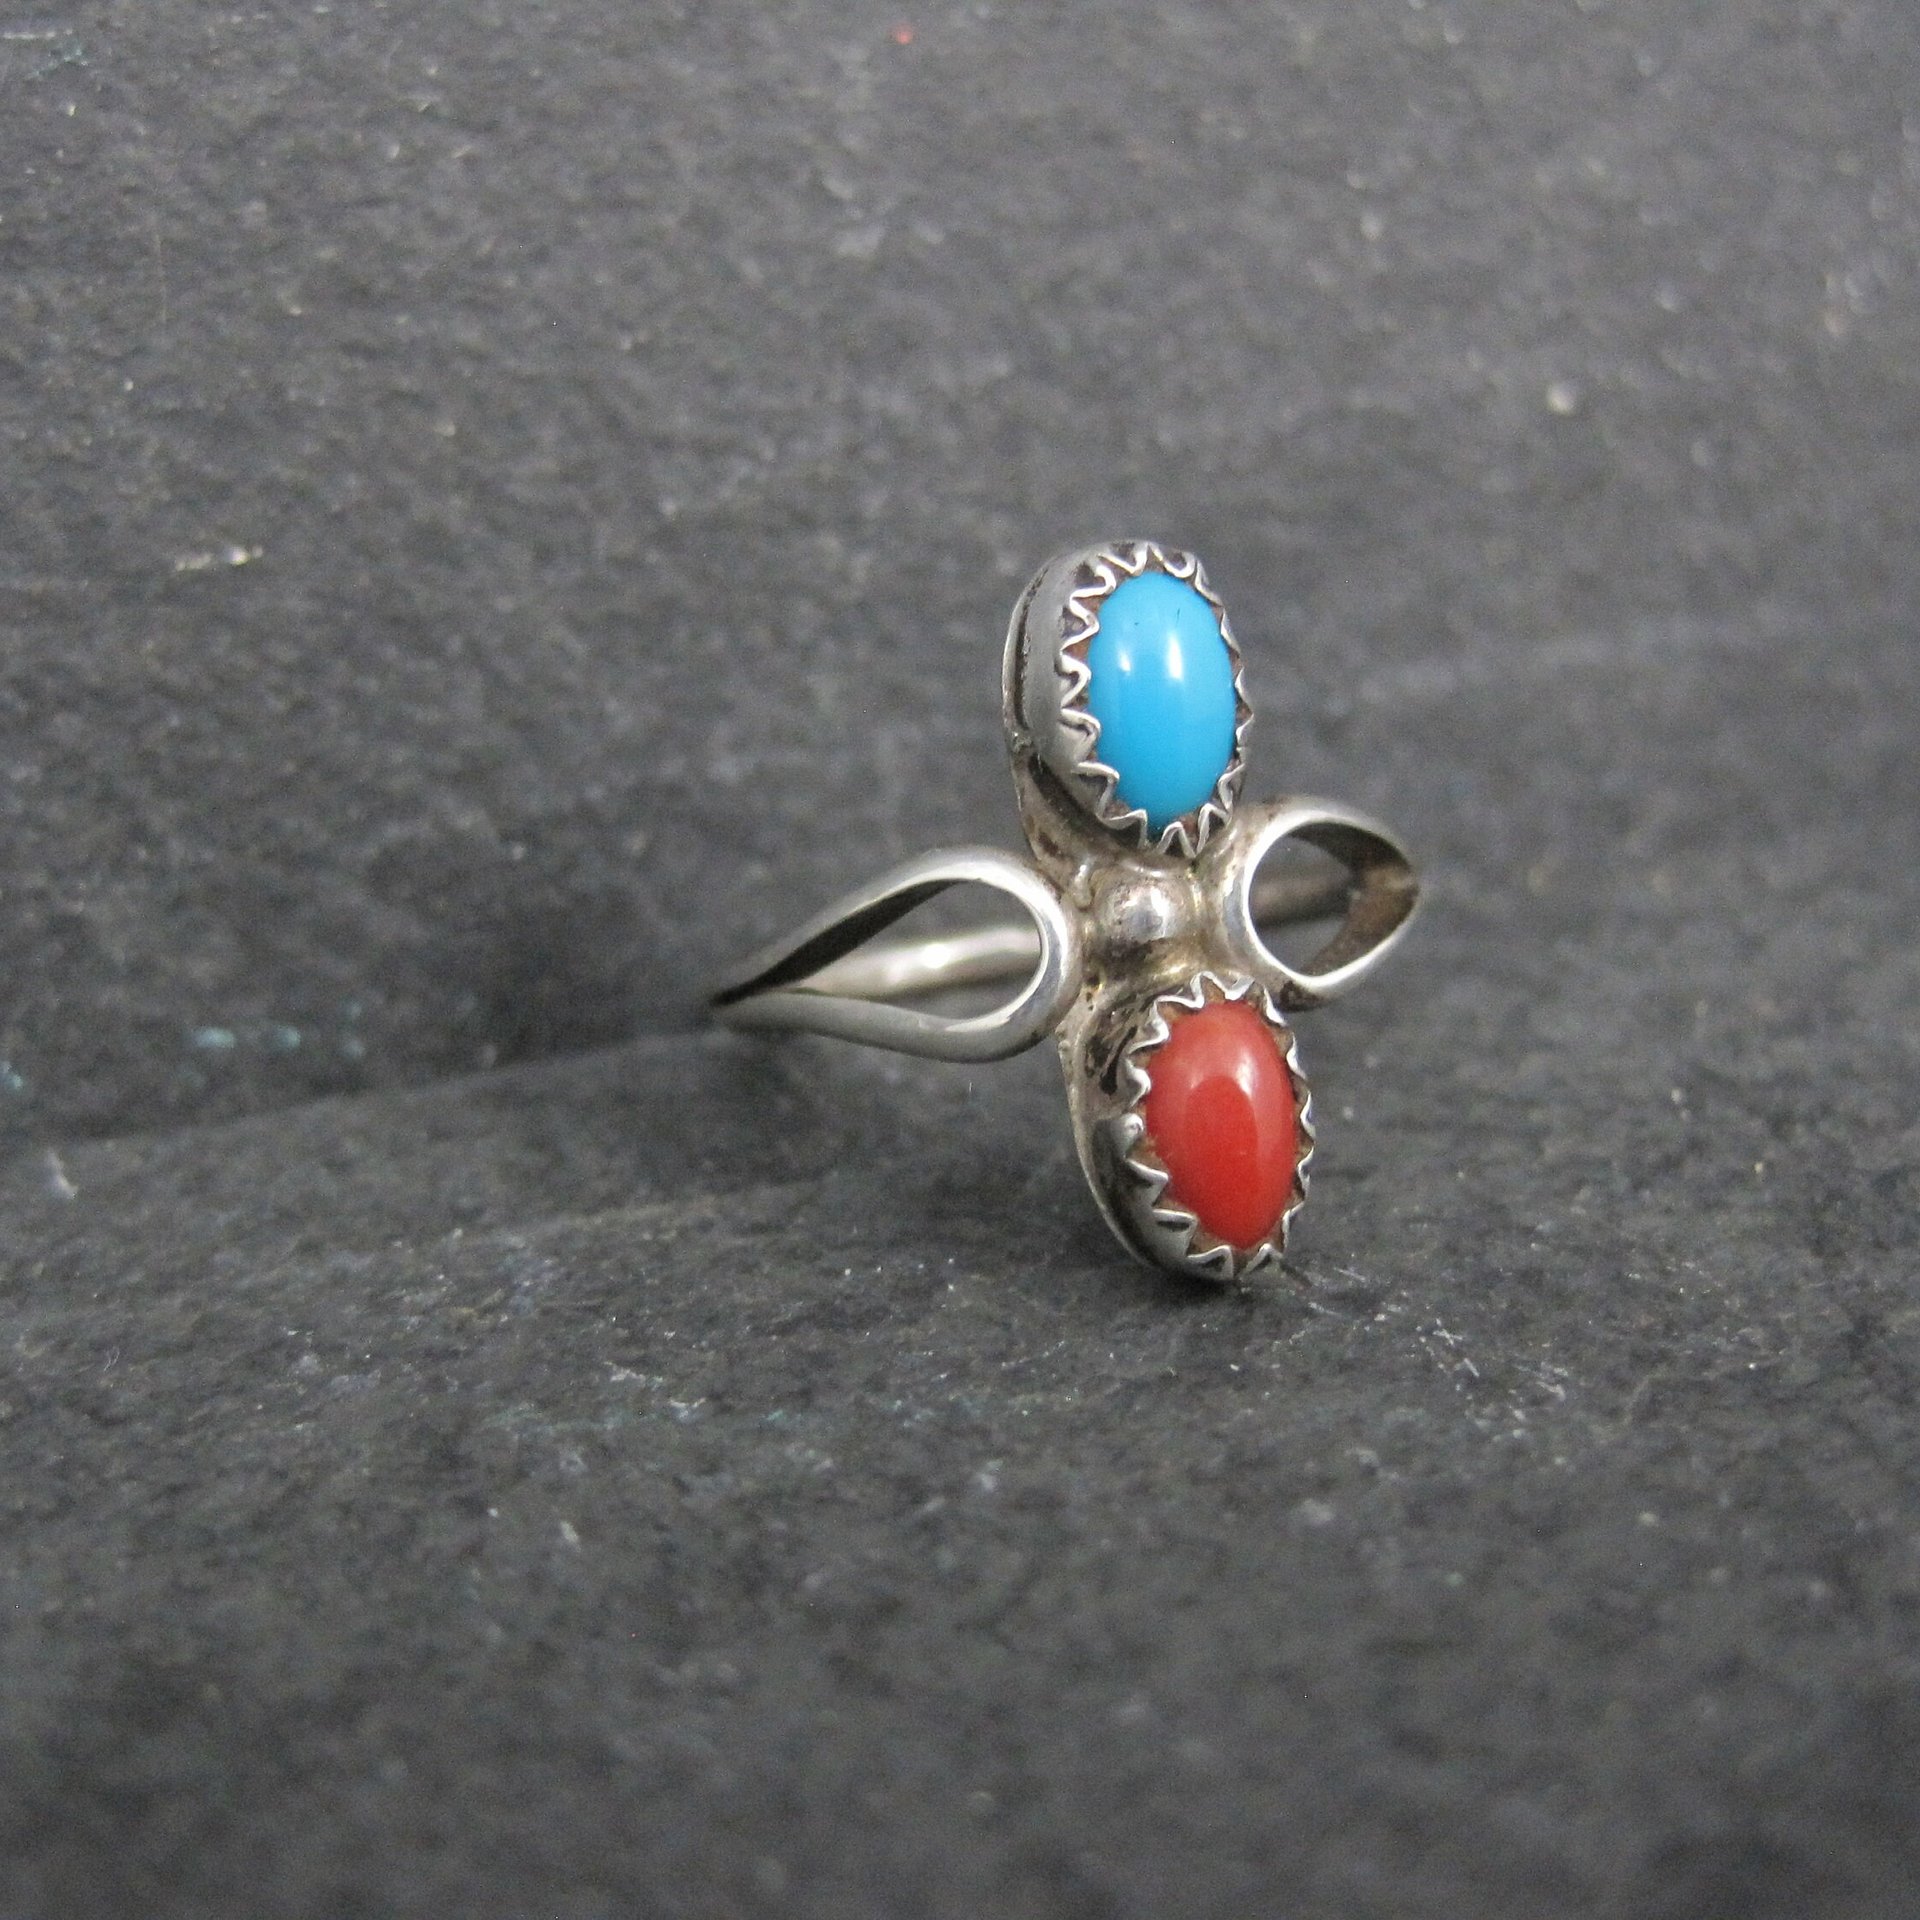 Dainty Turquoise and Coral Ring Size 4 Southwestern Vintage Sterling Silver